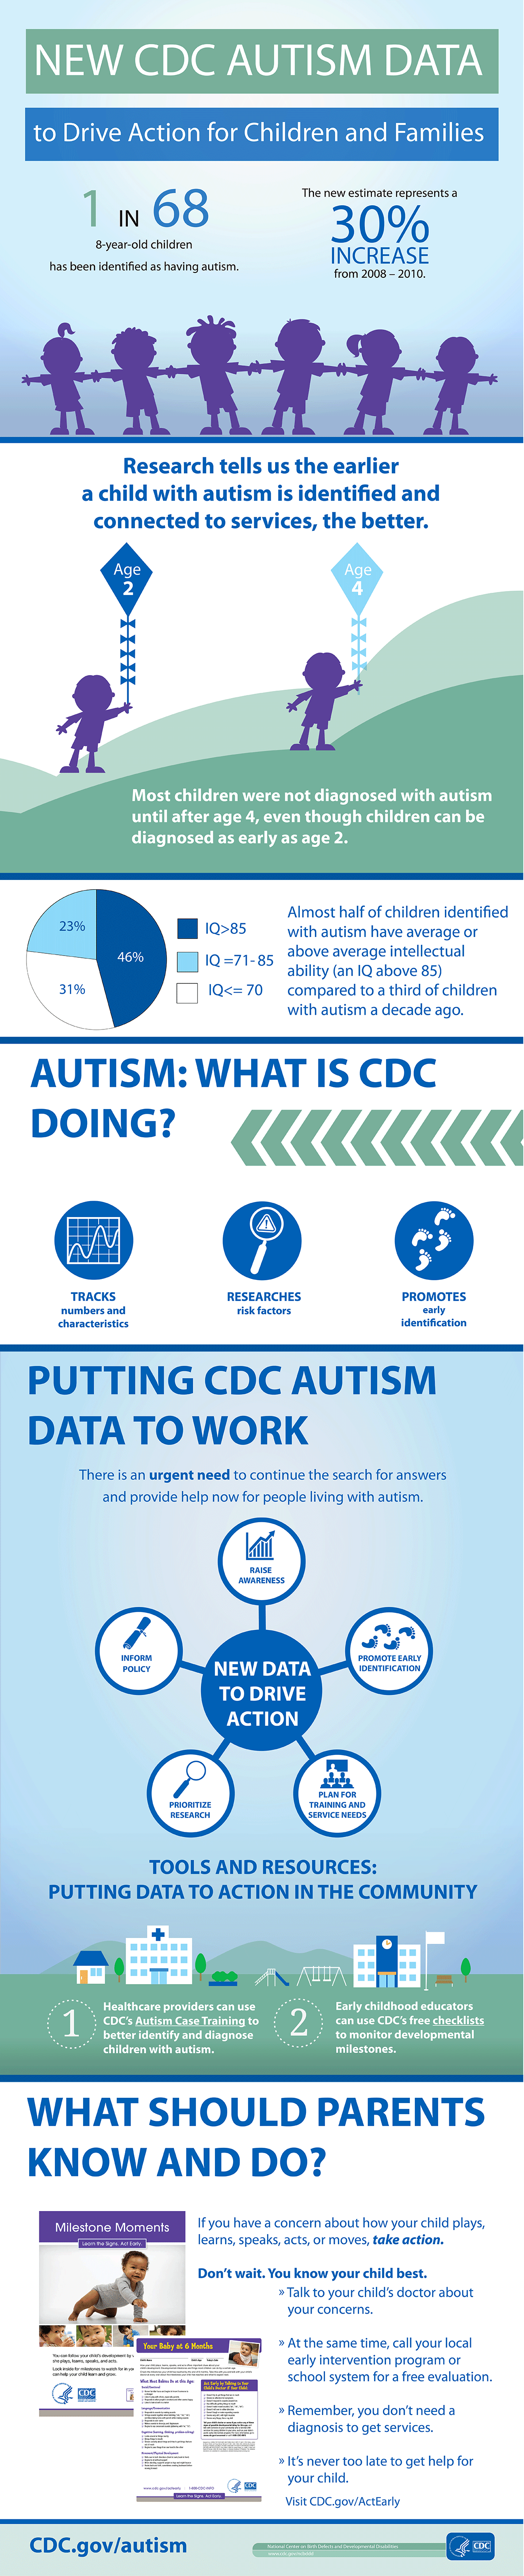 New CDC Autism Data to drive action for children and families1 in 68 8-year-old children has been identified as having autism. The new estimate represents a 30% increase from 2008-2010.Research tells us the earlier a child with autism is identified and connected to services, the better. Most children were not diagnosed with autism until after age 4, even though children can be diagnosed as early as age 2. Almost half of children identified with autism have average or above average intellectual ability (an IQ above 85) compared to a third of children with autism a decade ago. Autism: What is CDC doing? Tracks numbers and characteristics; researches risk factors; promotes early identification.Putting CDC Autism Data to work. There is an urgent need to continue the search for answers and provide help for people living with autism. Tools and Resources: Putting data to action in the communityWhat should Parents know and do?If you have a concern about how your child plays, learns, speaks, acts, or moves, take action. Don’t wait. You know your child best. Talk to your child’s doctor about your concerns. At the same time, call your local early intervention program or school system for a free evaluation. Remember, you don’t need a diagnosis to get services. It’s never too late to get help for your child. Visit cdc.gov/actearly.Cdc.gov/autismNational Center on Birth Defects and Developmental Disabilities